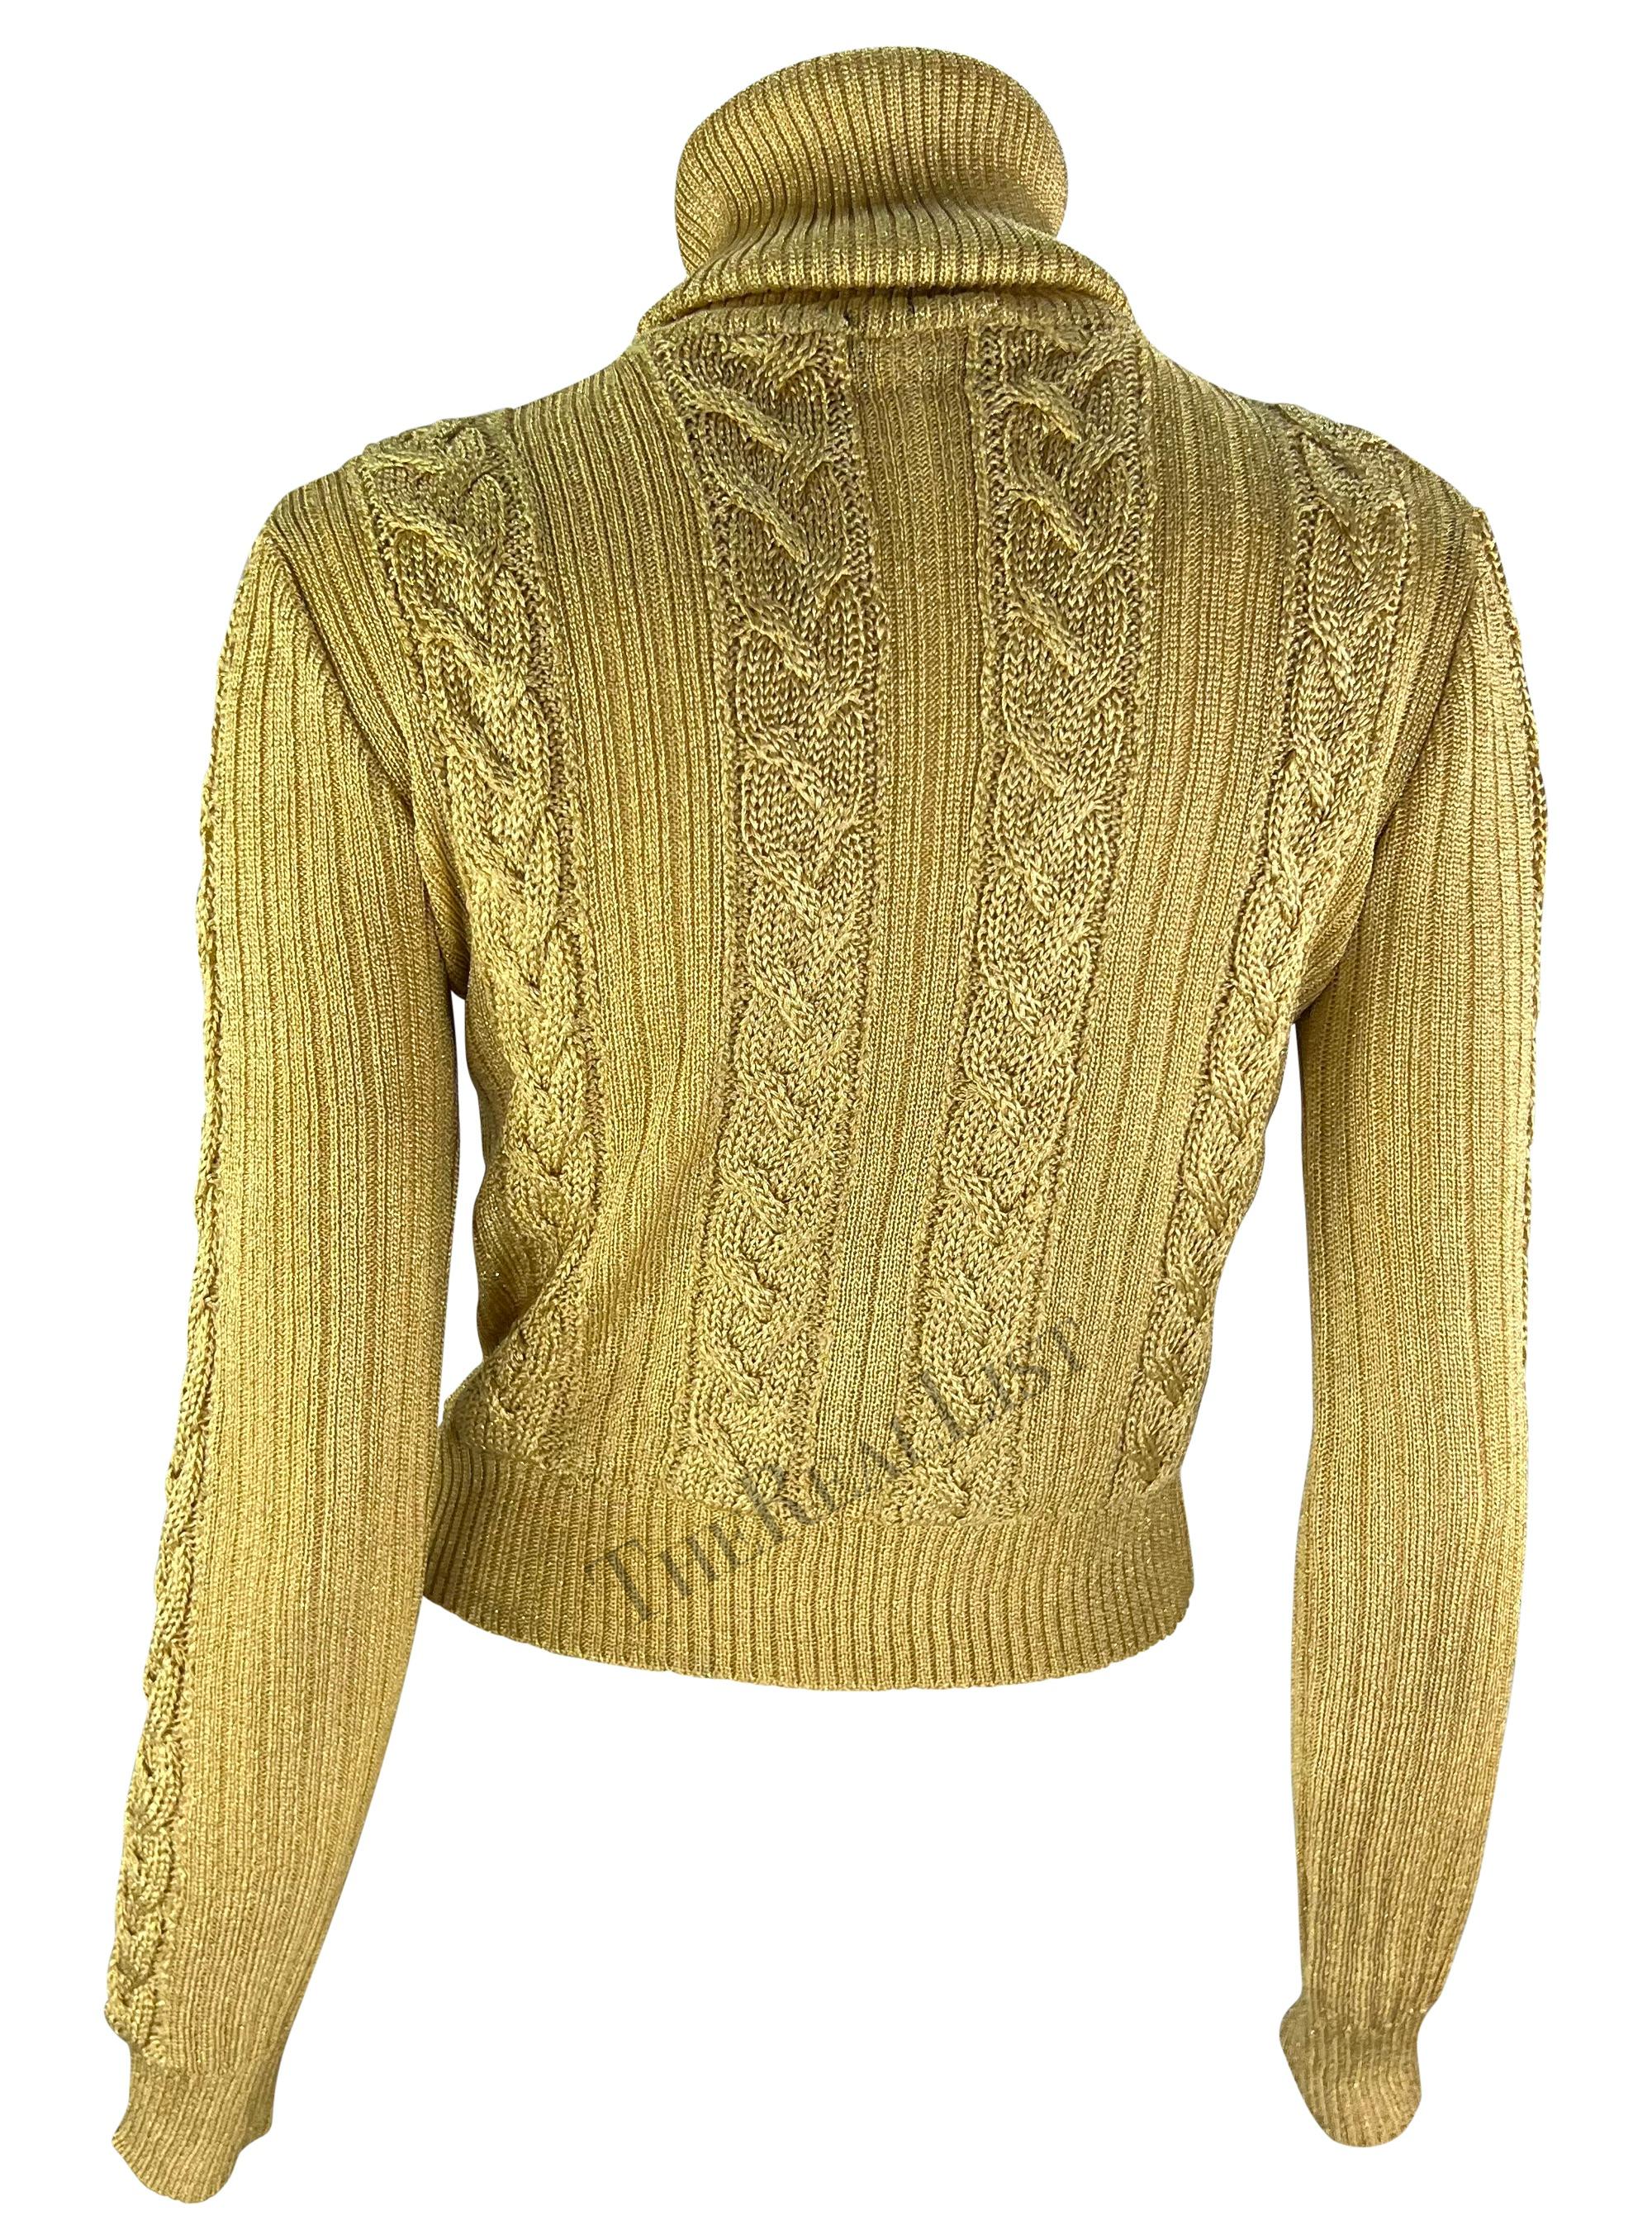 F/W 1994 Gianni Versace Ad Runway Gold Metallic Cable Knit Turtleneck Sweater For Sale 3